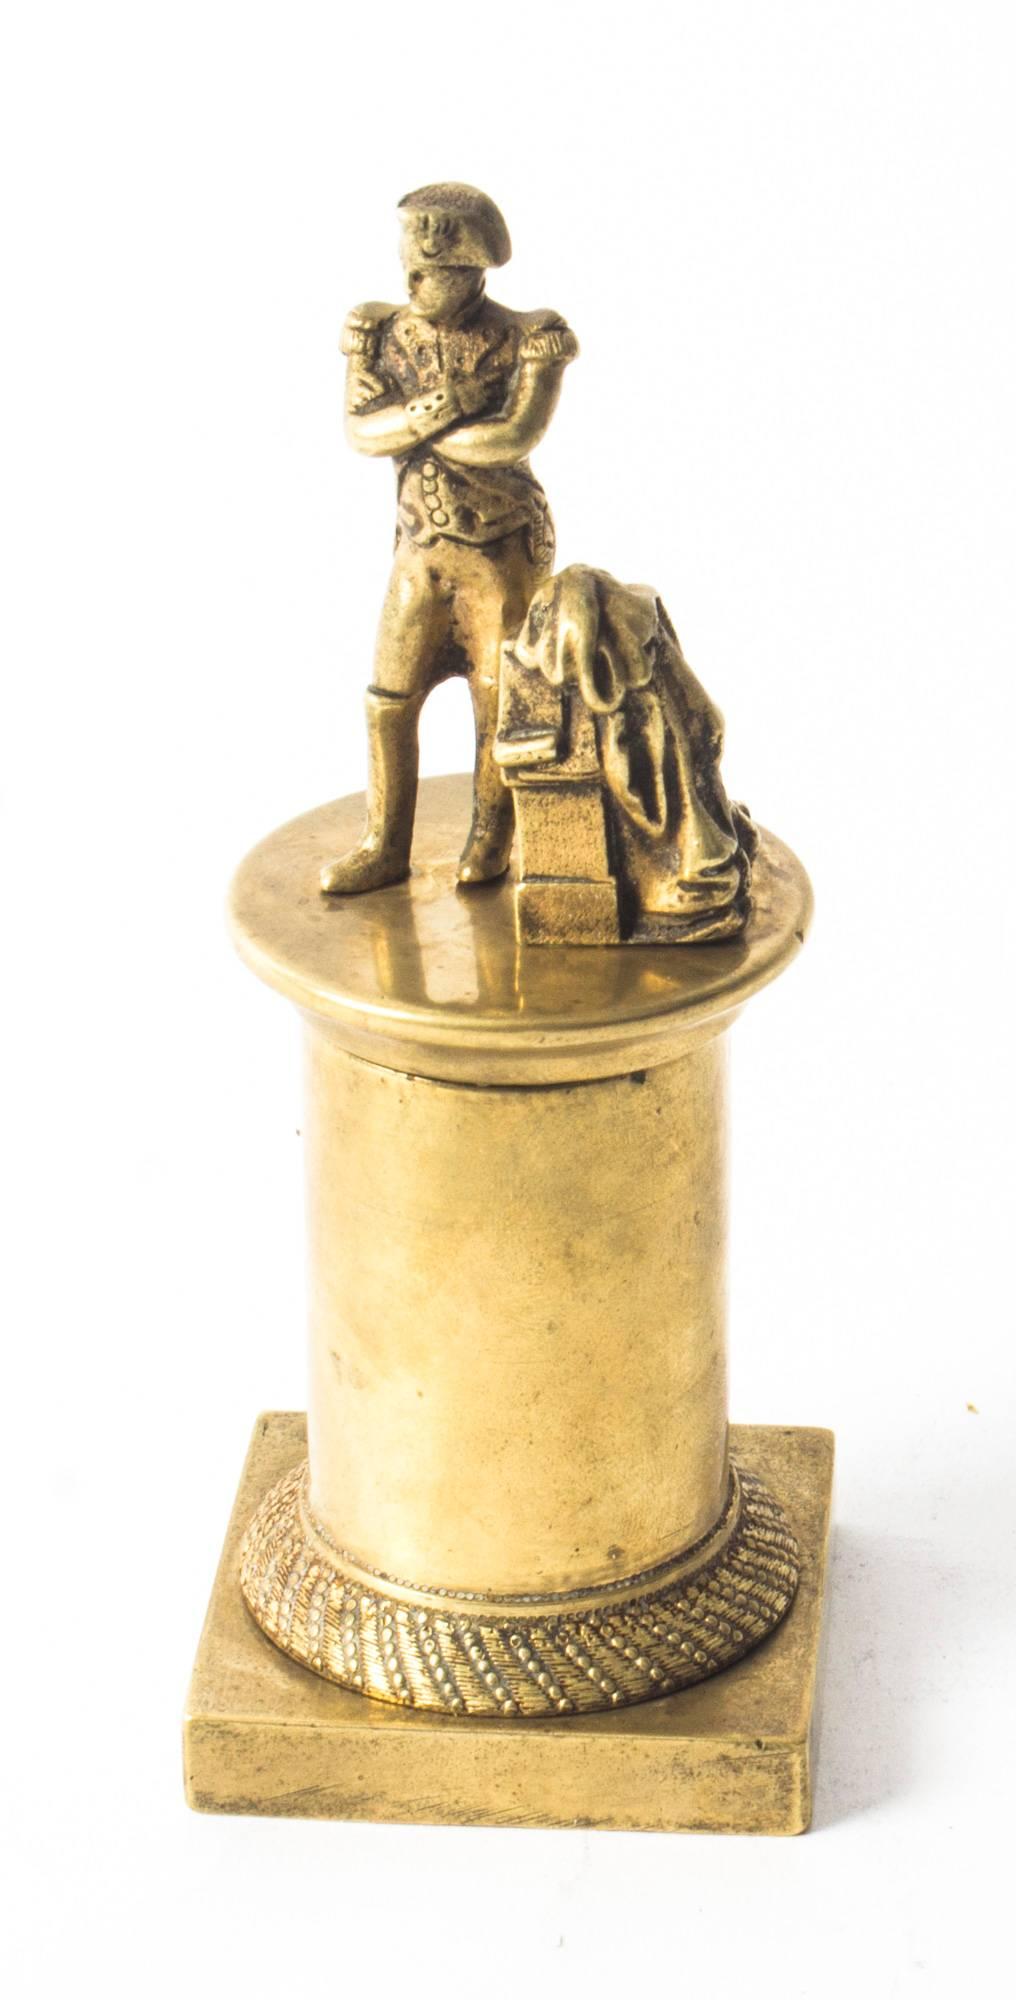 This is a charming atom polished bronze desk model sculpture of Napoleon Bonaparte, circa 1830 in date.
 
It features Napoleon in uniform mounted on a beautiful cylindrical columnar pedestal with a decorative engine turned socle raised on a square